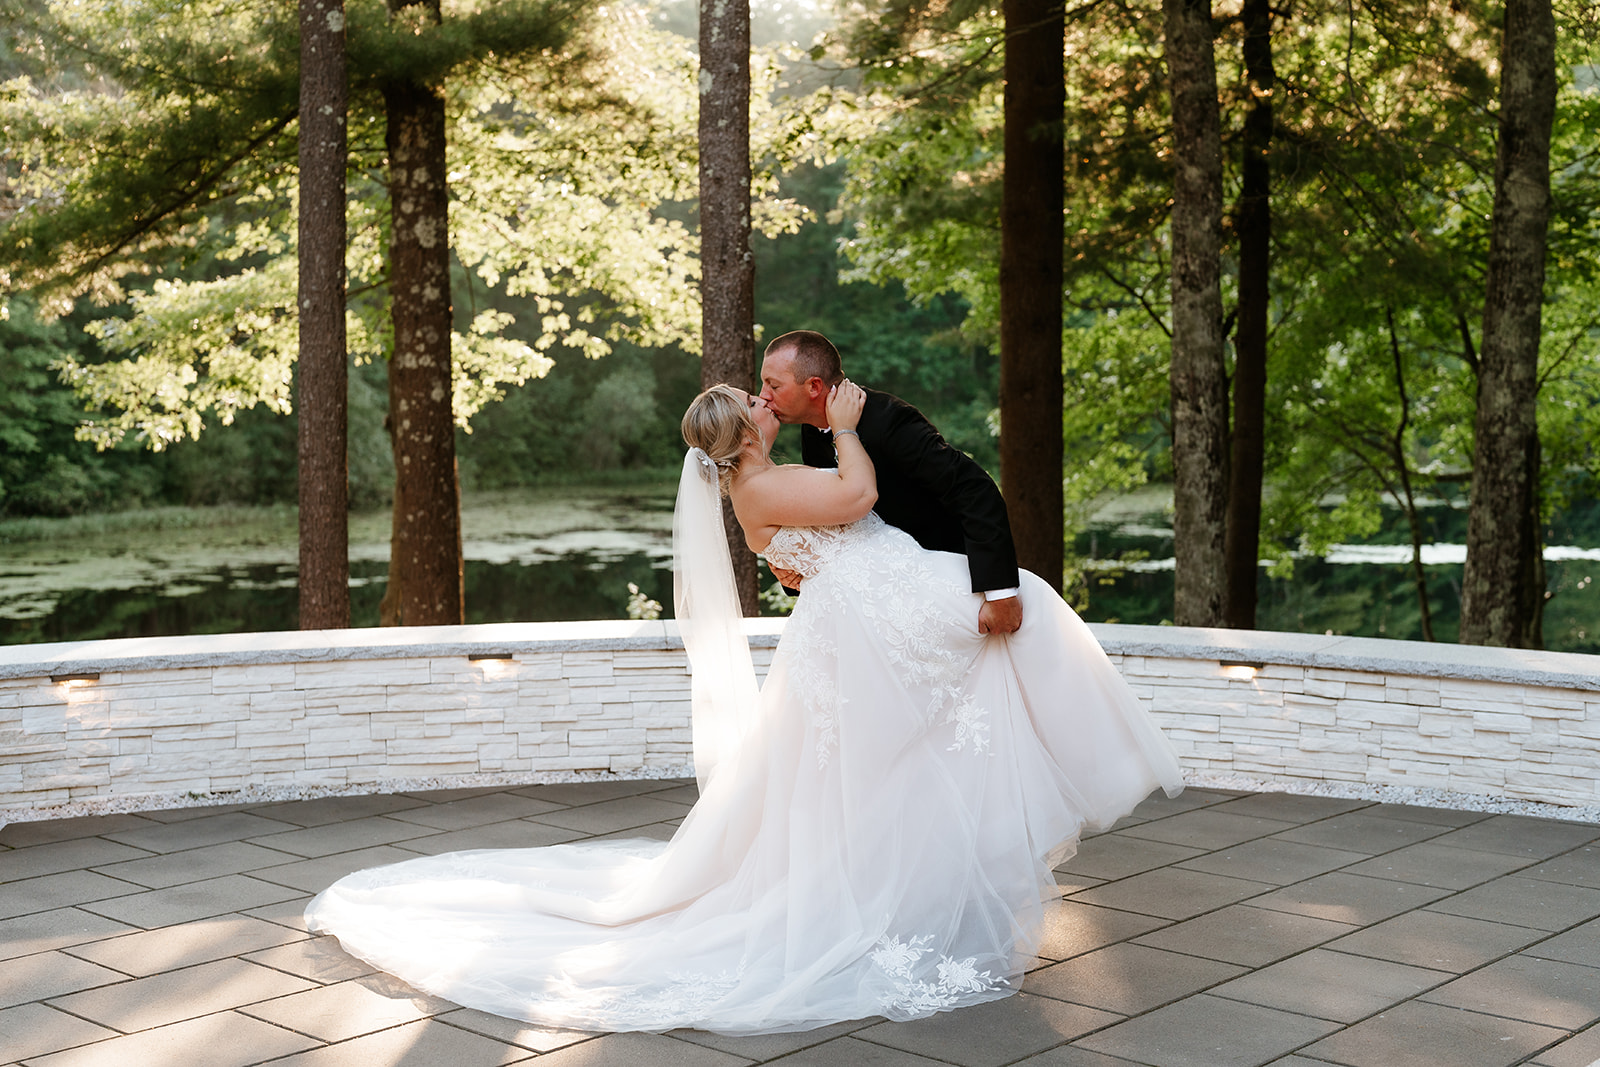 A bride and groom embrace on a sunlit deck surrounded by trees, while kissing